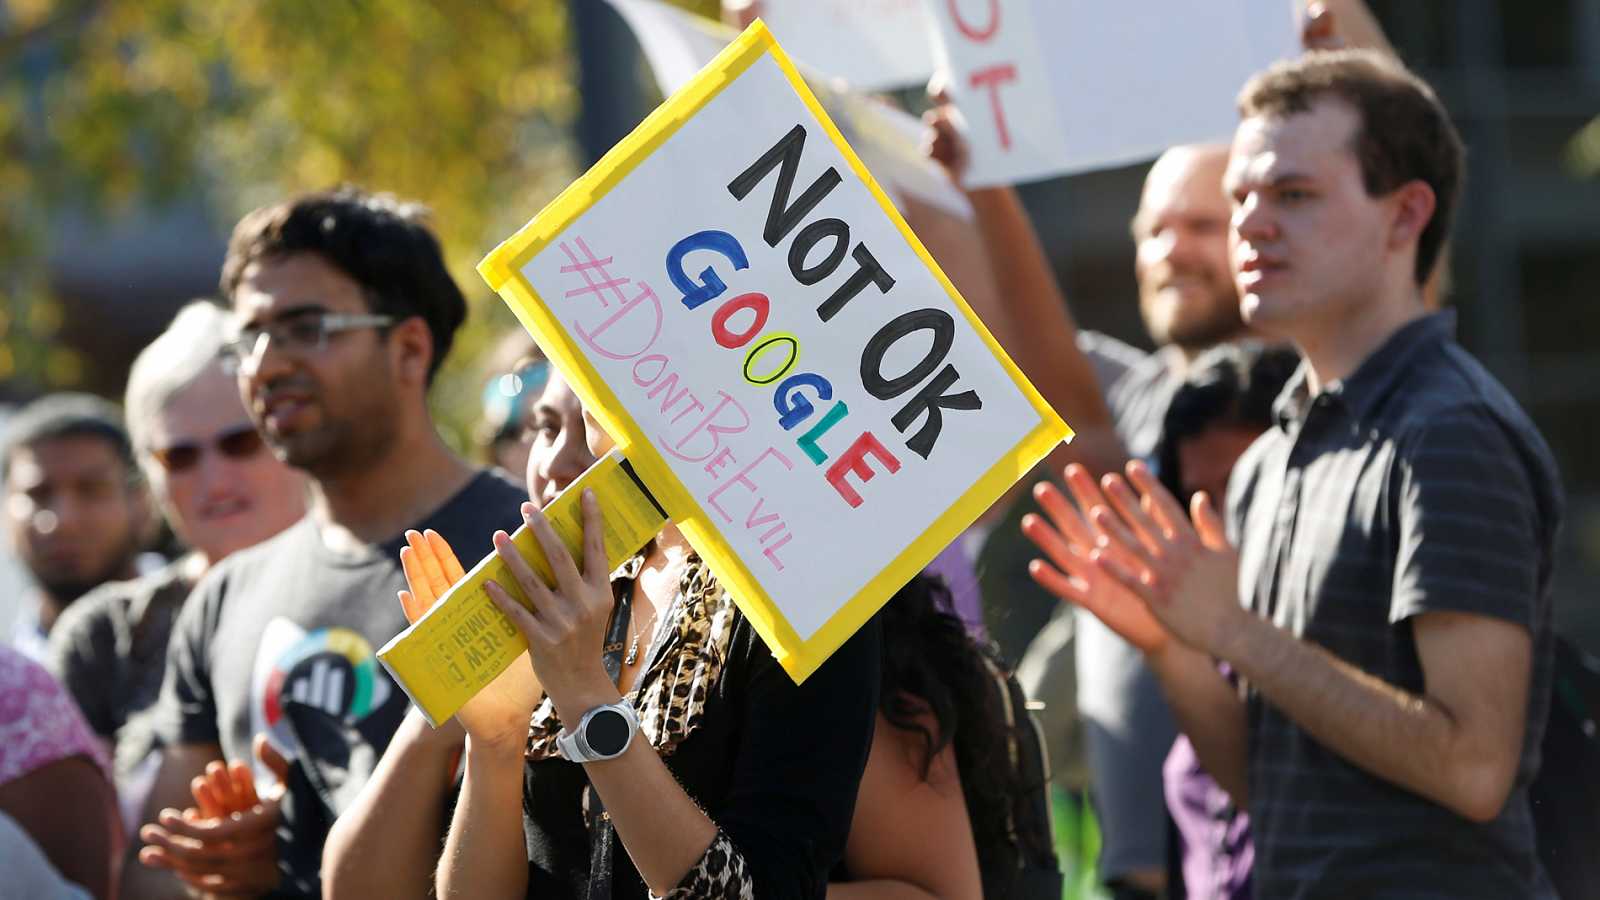 Google walkout organizers say they face retaliation from within the company